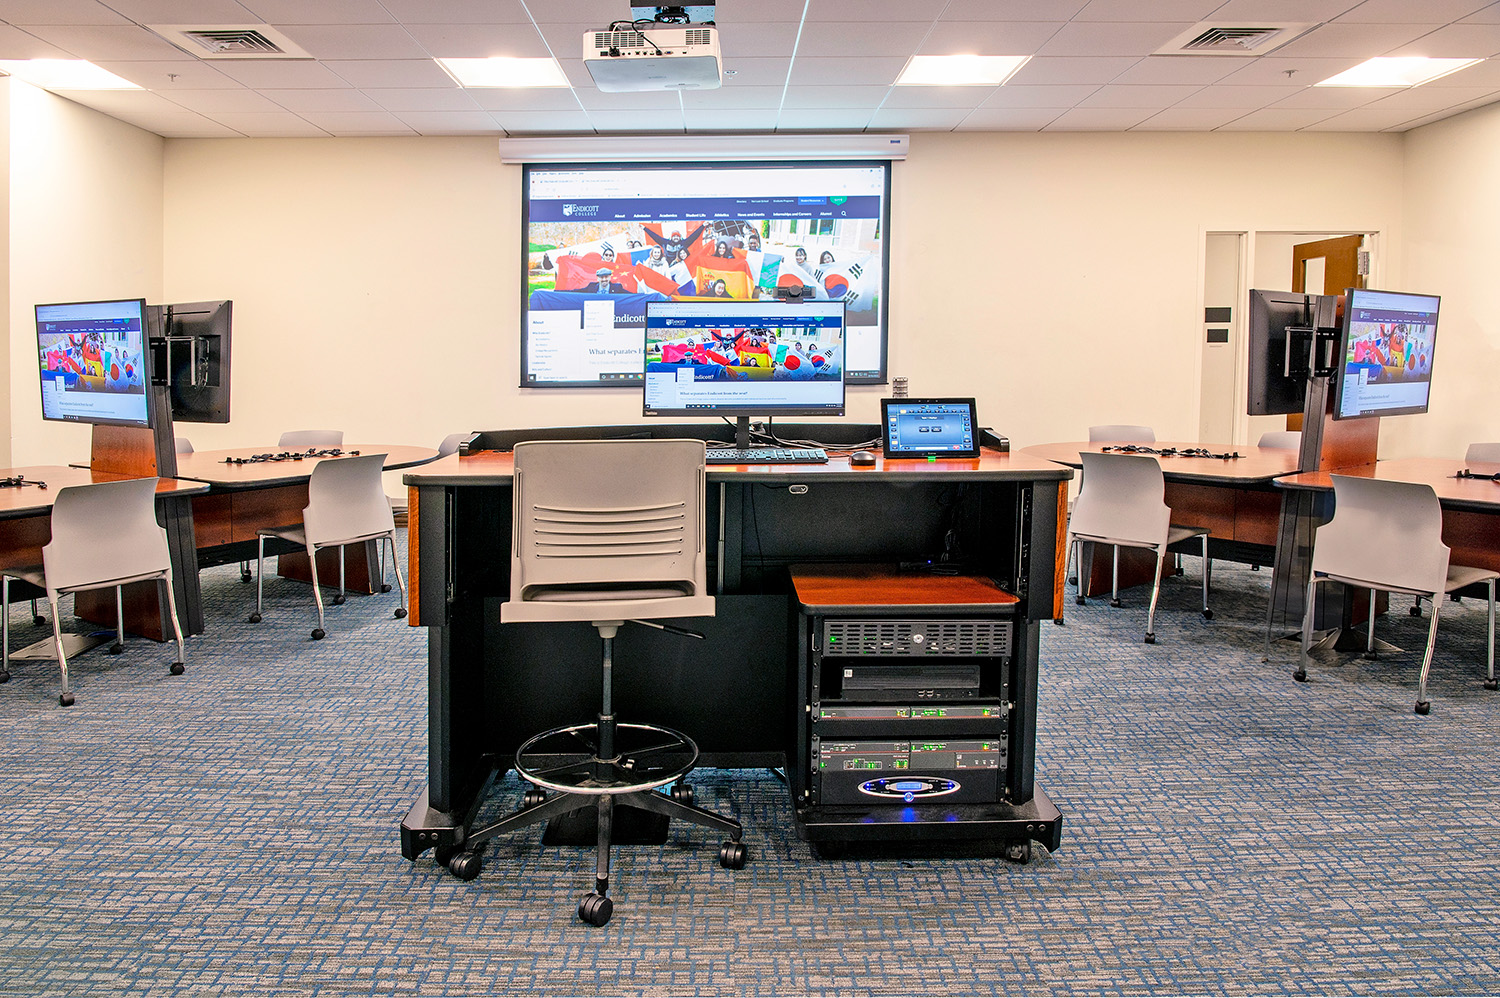 Having the AV system components rack-mounted within the instructor station kept the installation local without taking floor space with a rack in a corner or needing a separate equipment room.